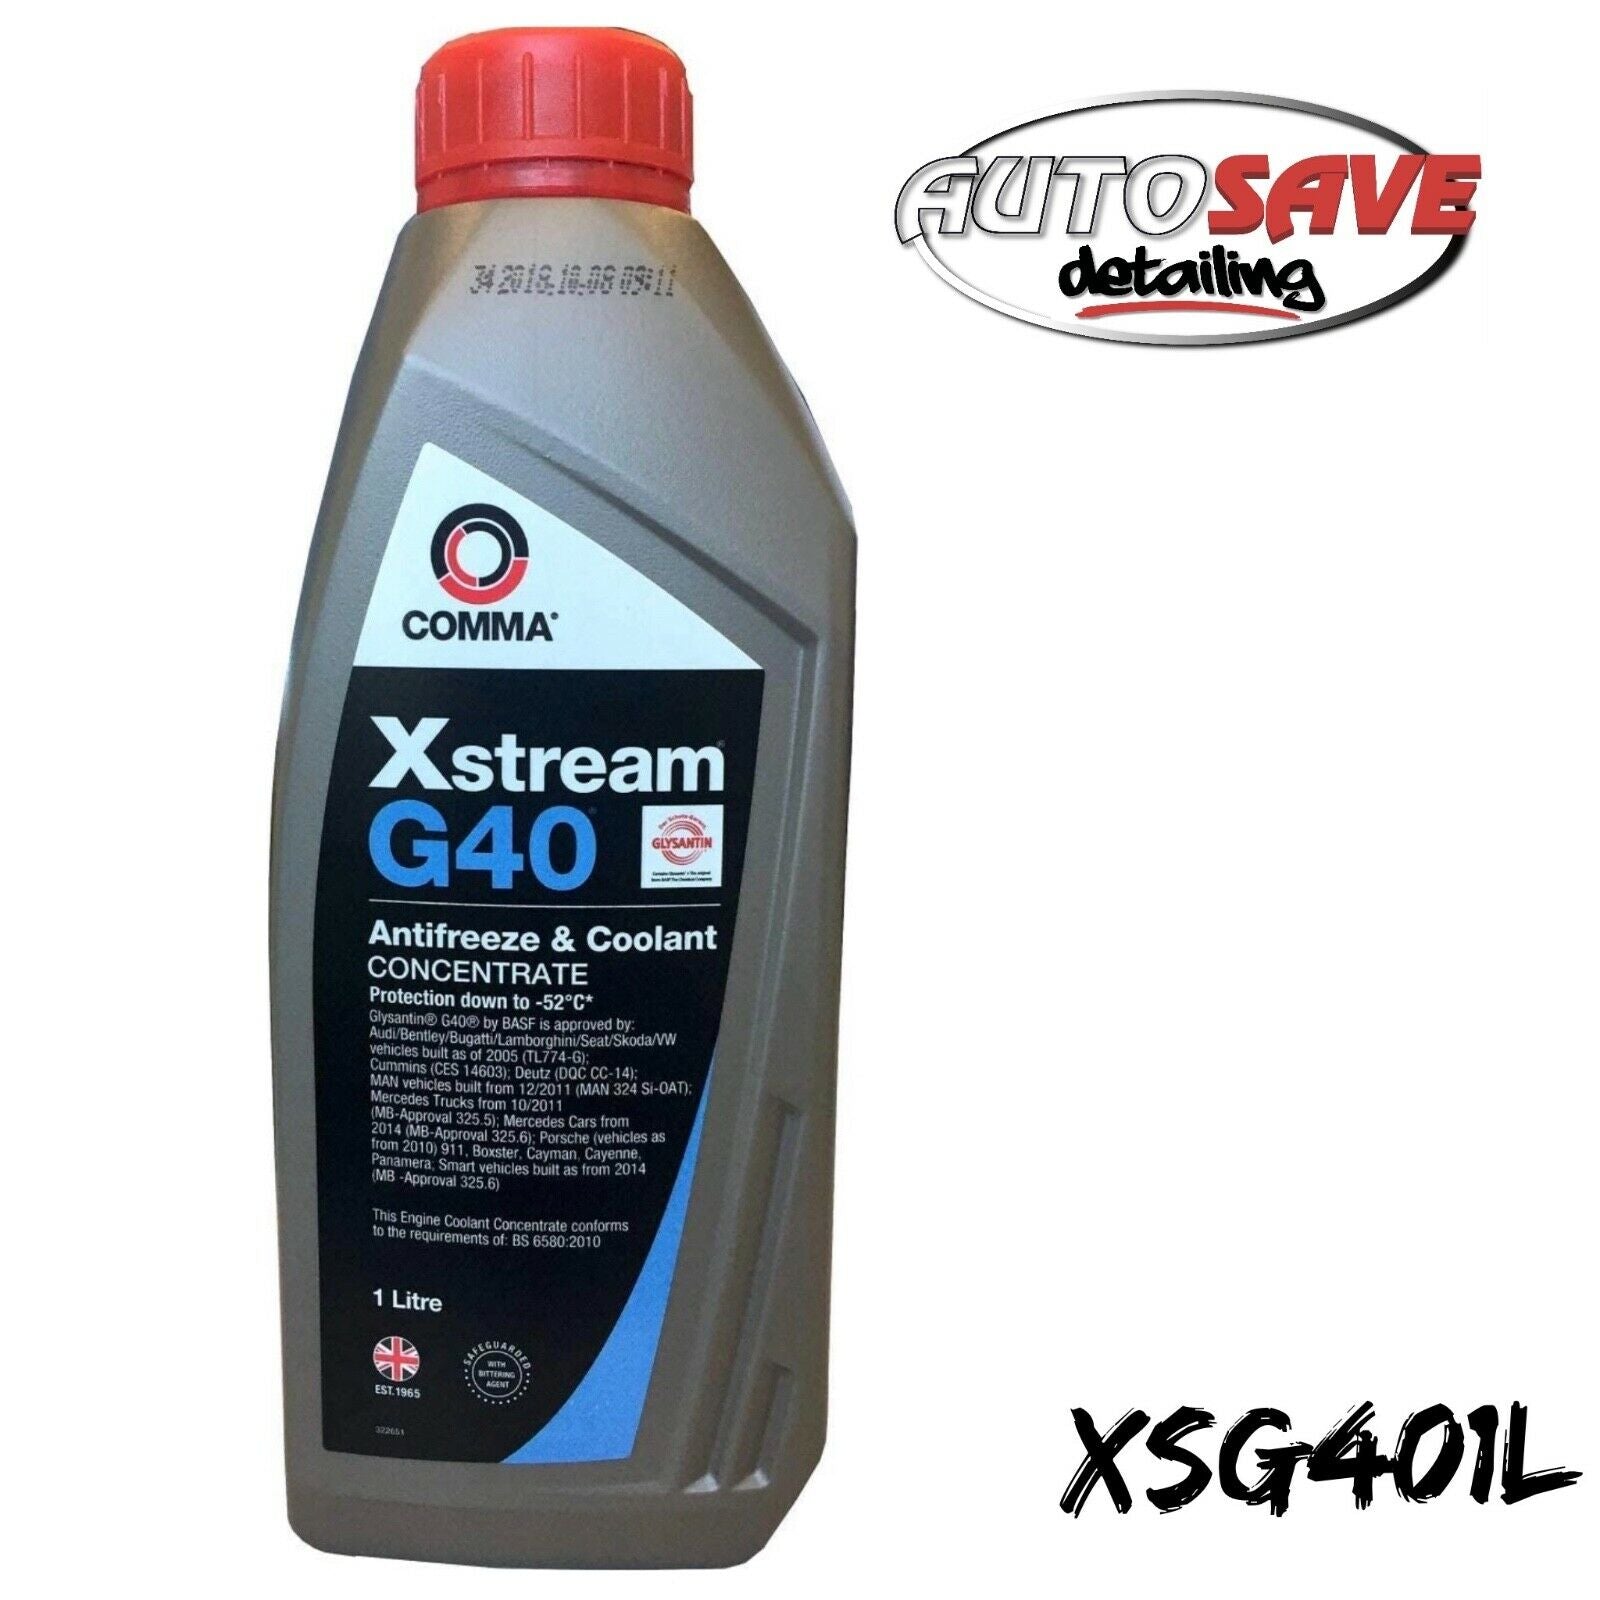 Comma - Xstream G40 Antifreeze and Coolant Concentrate